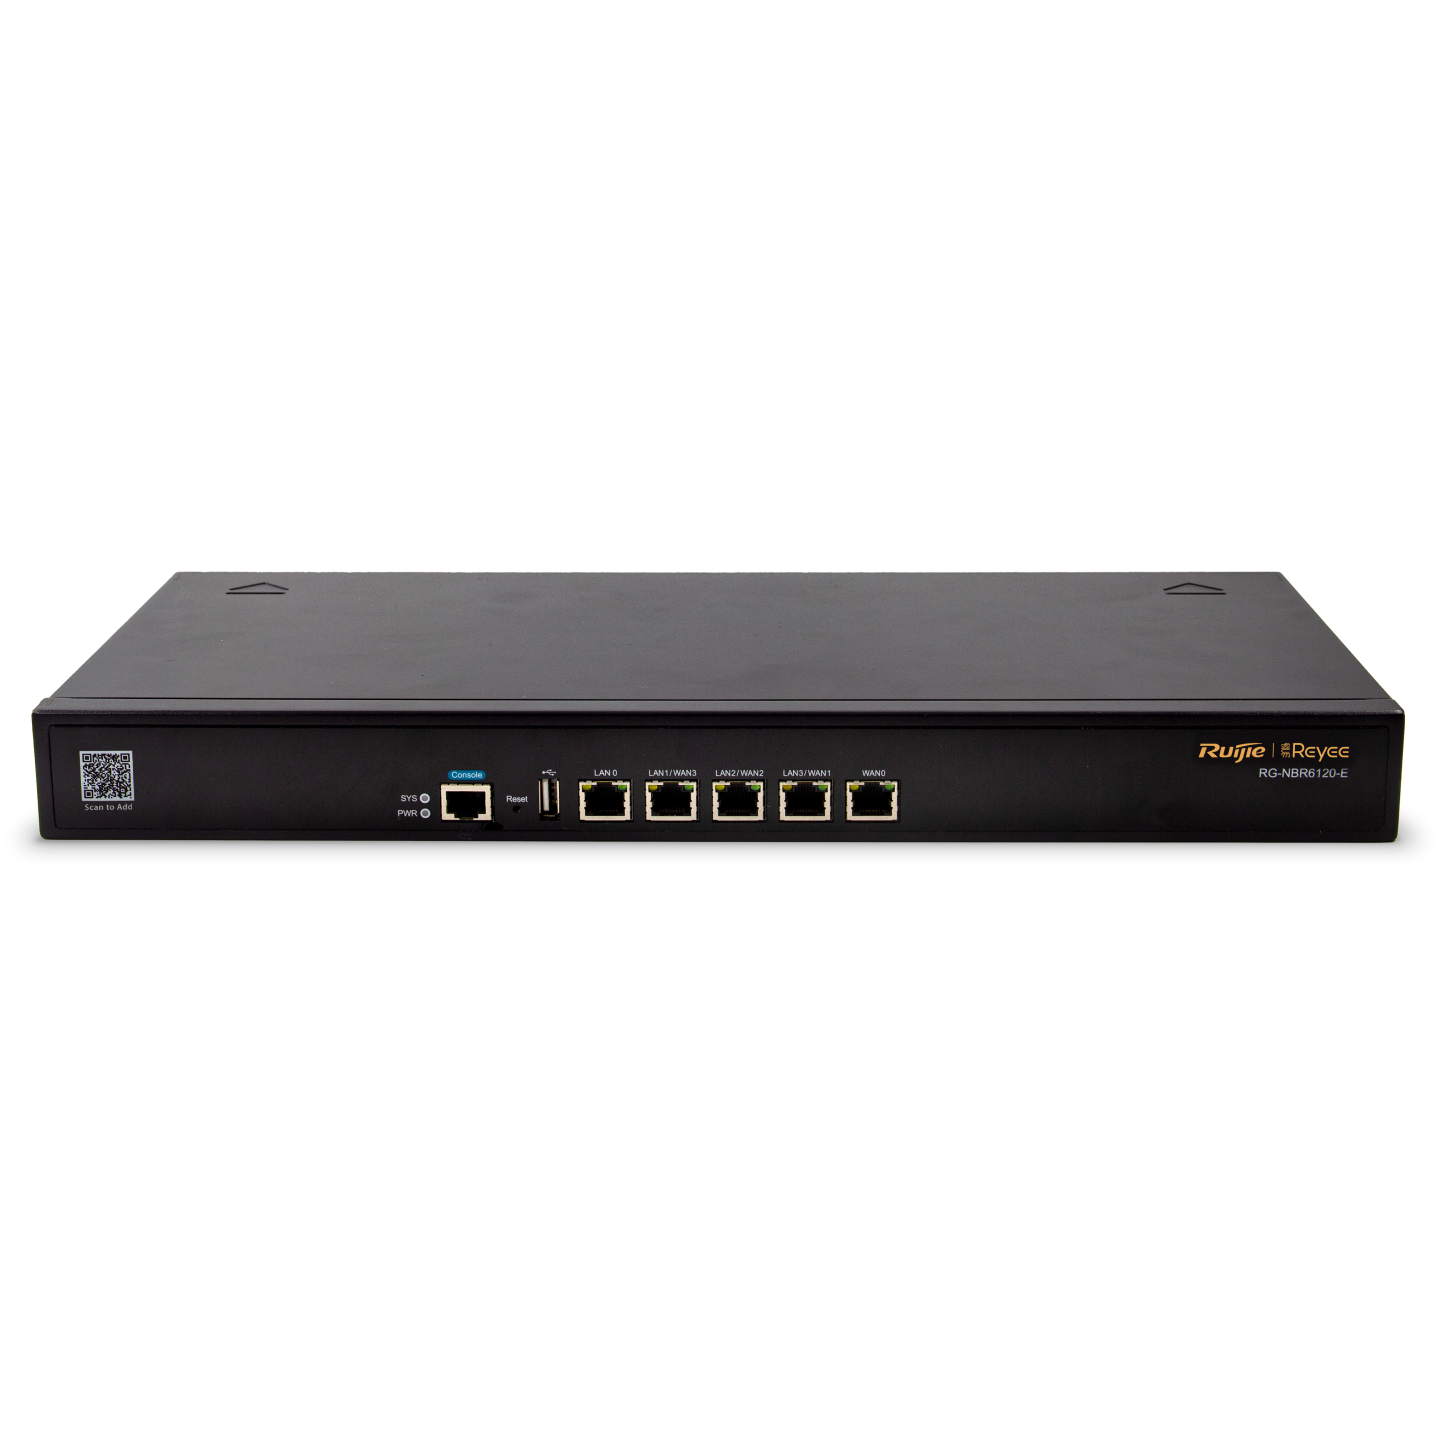 Reyee RG-NBR6120-E High-performance Cloud Managed Router